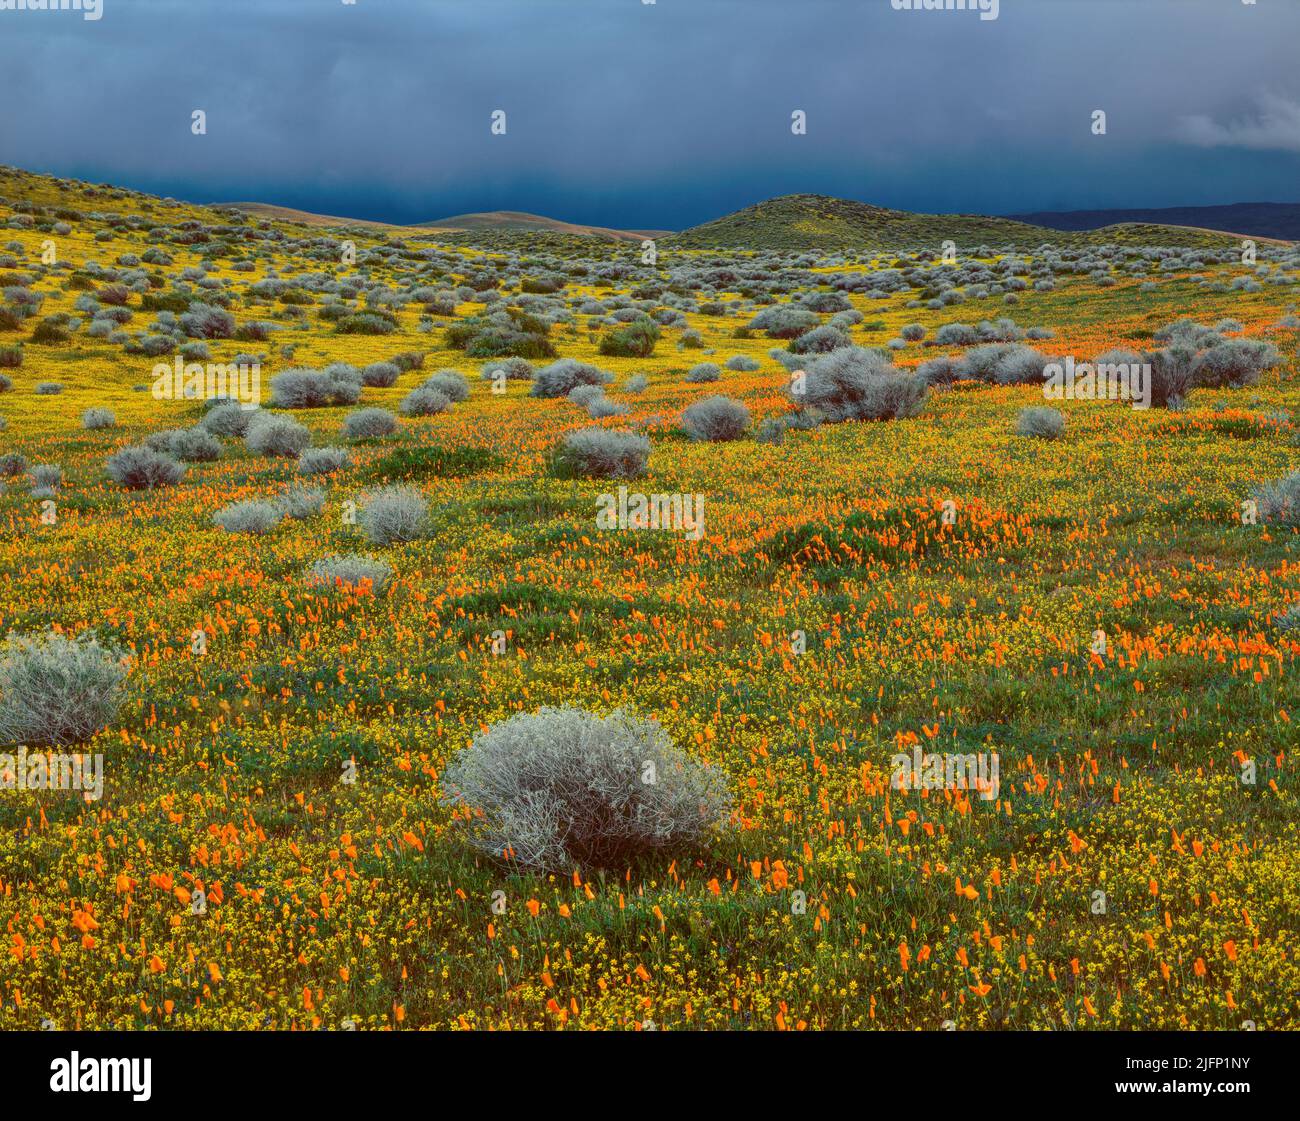 Storm Clouds, Poppies, Goldfields, Antelope Valley California Poppy Reserve, Kern County, Californie Banque D'Images